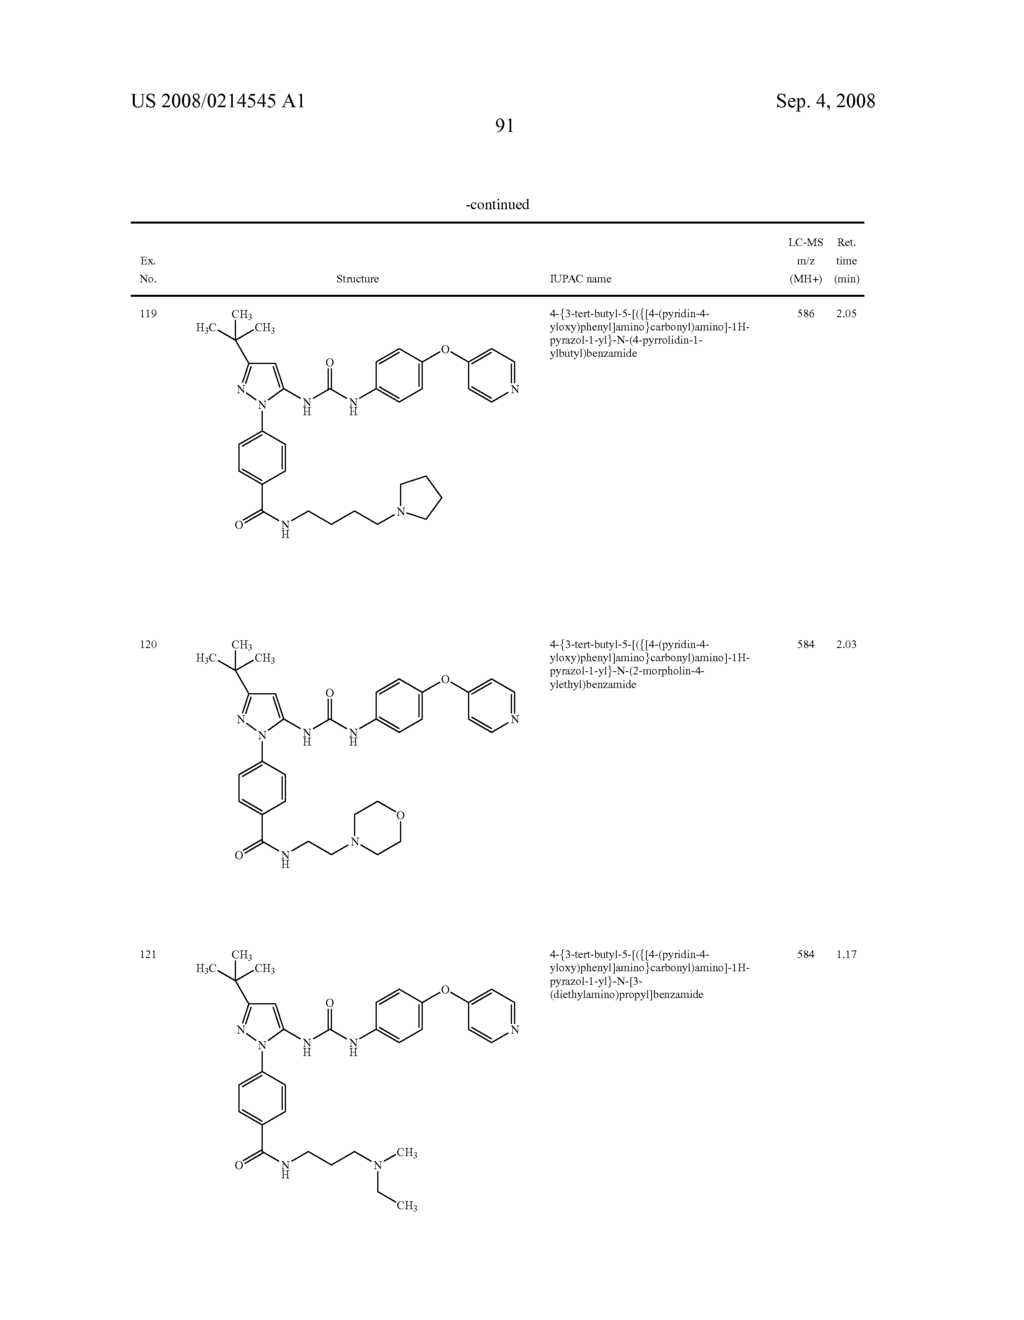 Substituted Pyrazolyl Urea Derivatives Useful in the Treatment of Cancer - diagram, schematic, and image 92